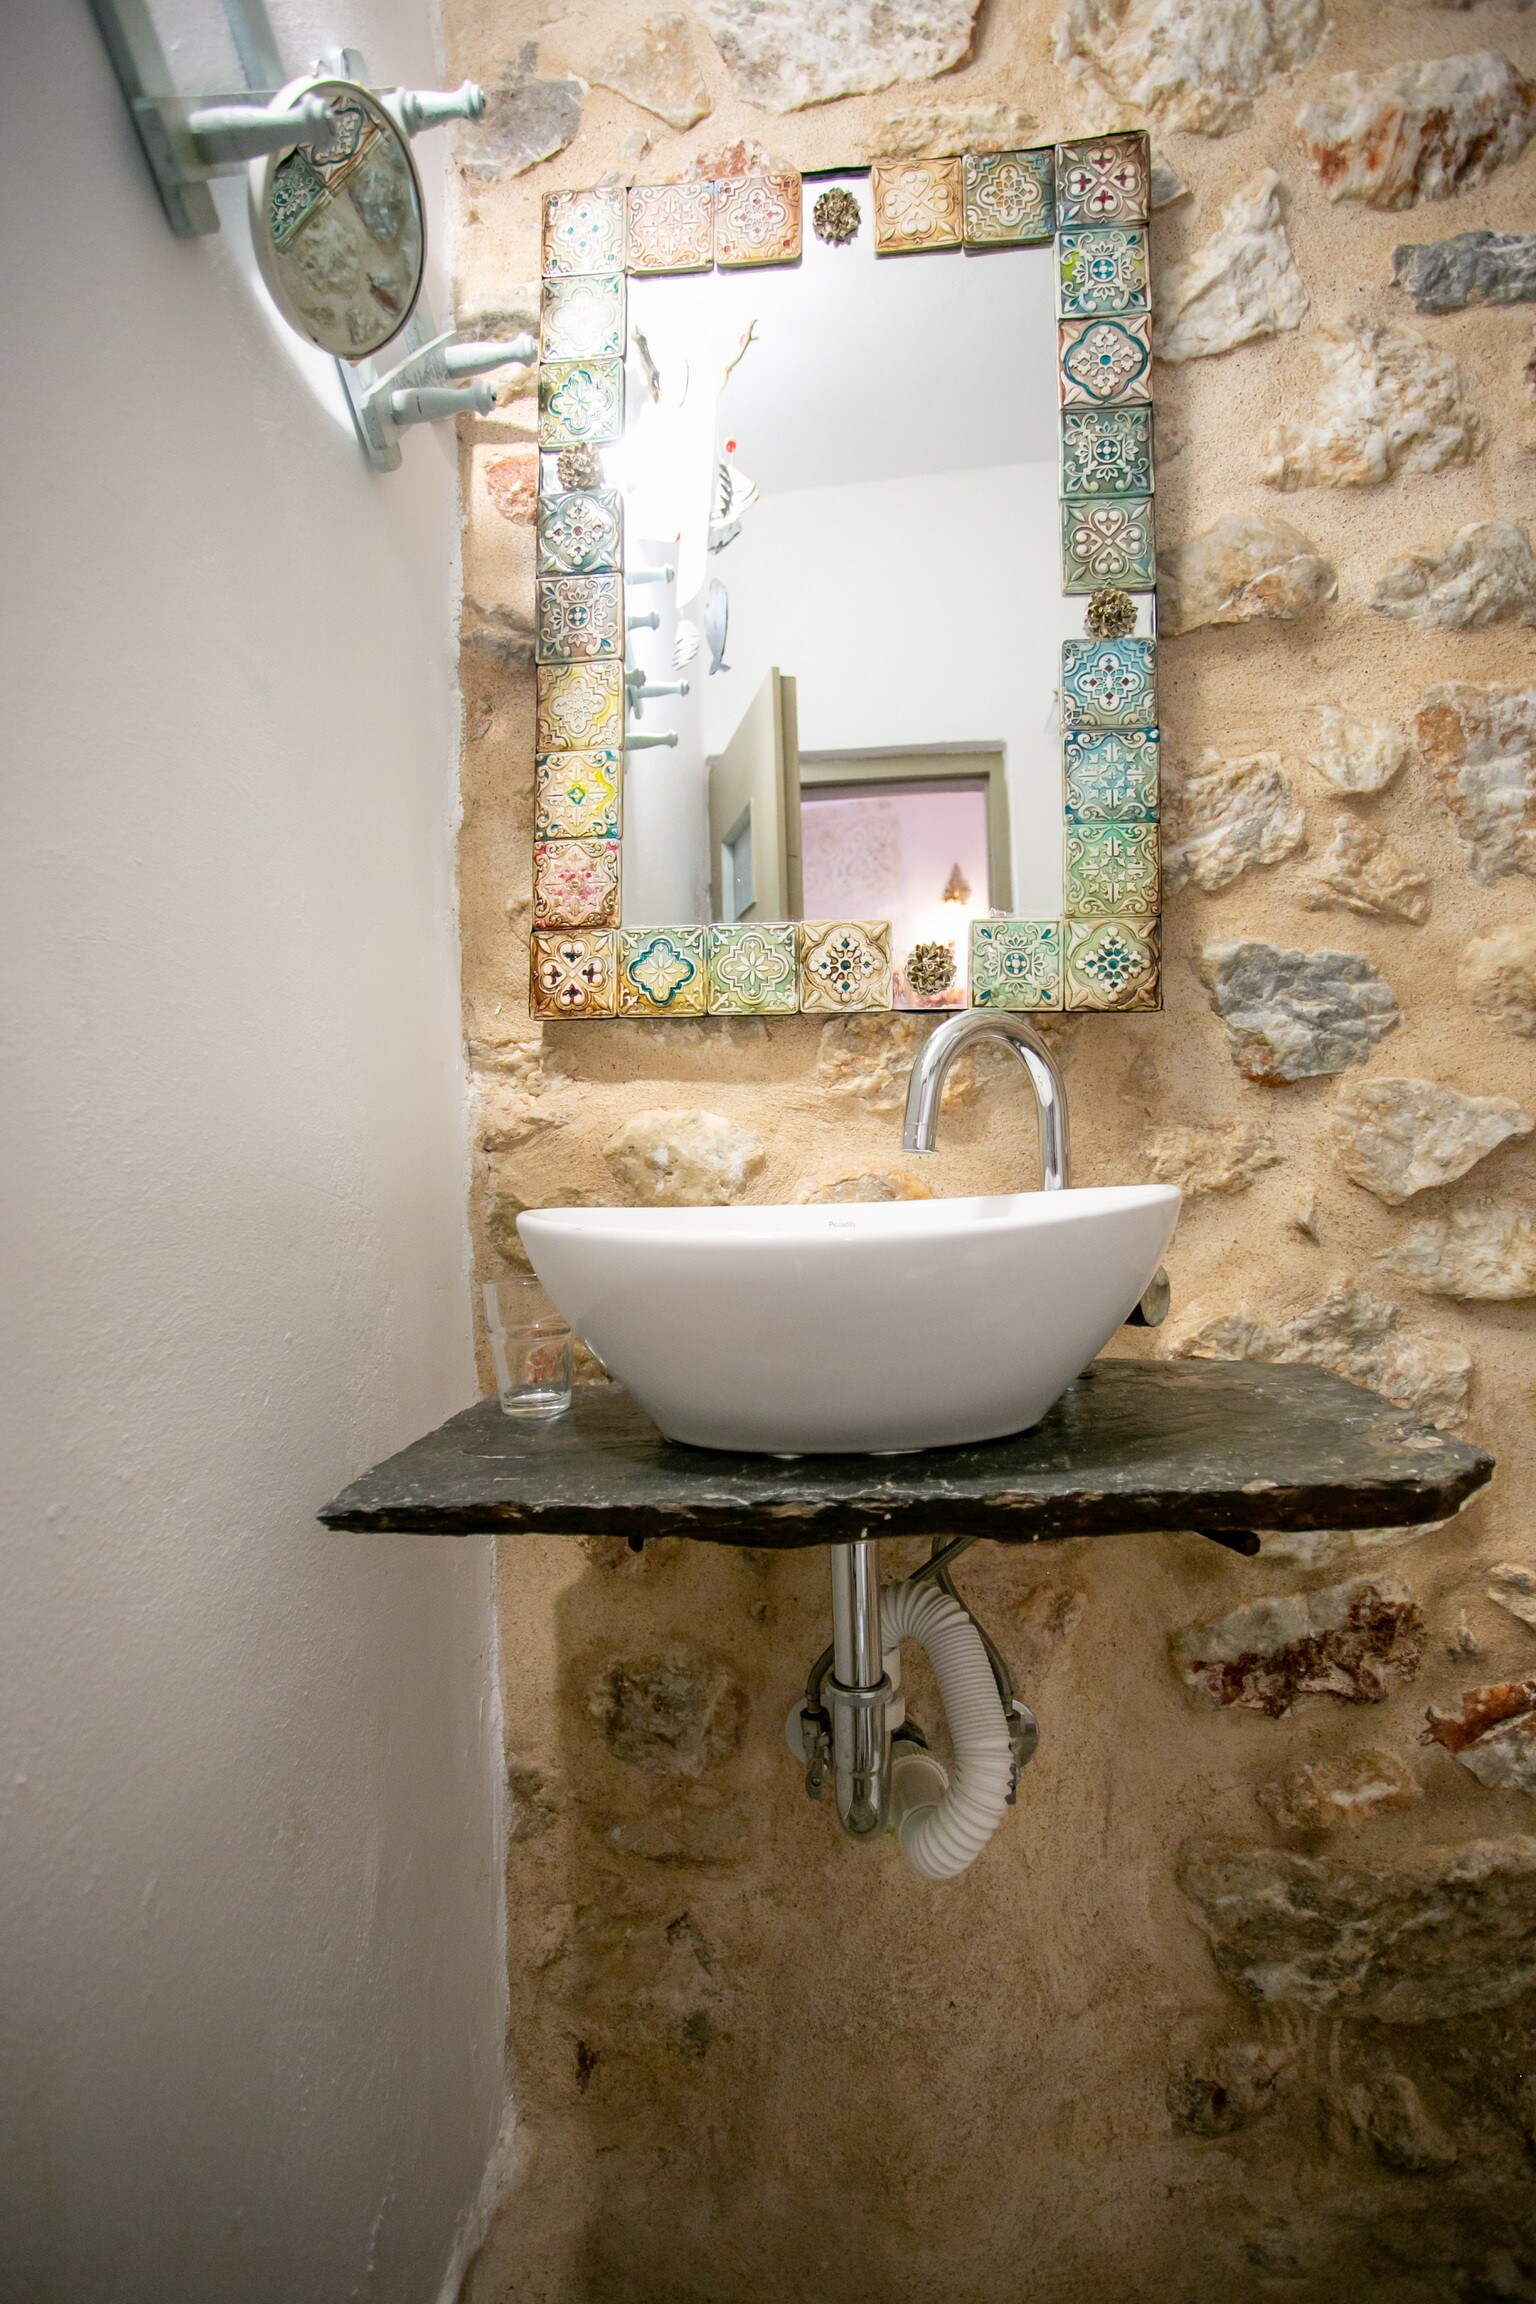 Bathroom of Cozy country house,4 guests,Renovated,Near tavern,cafe, beach,Mani,Greece